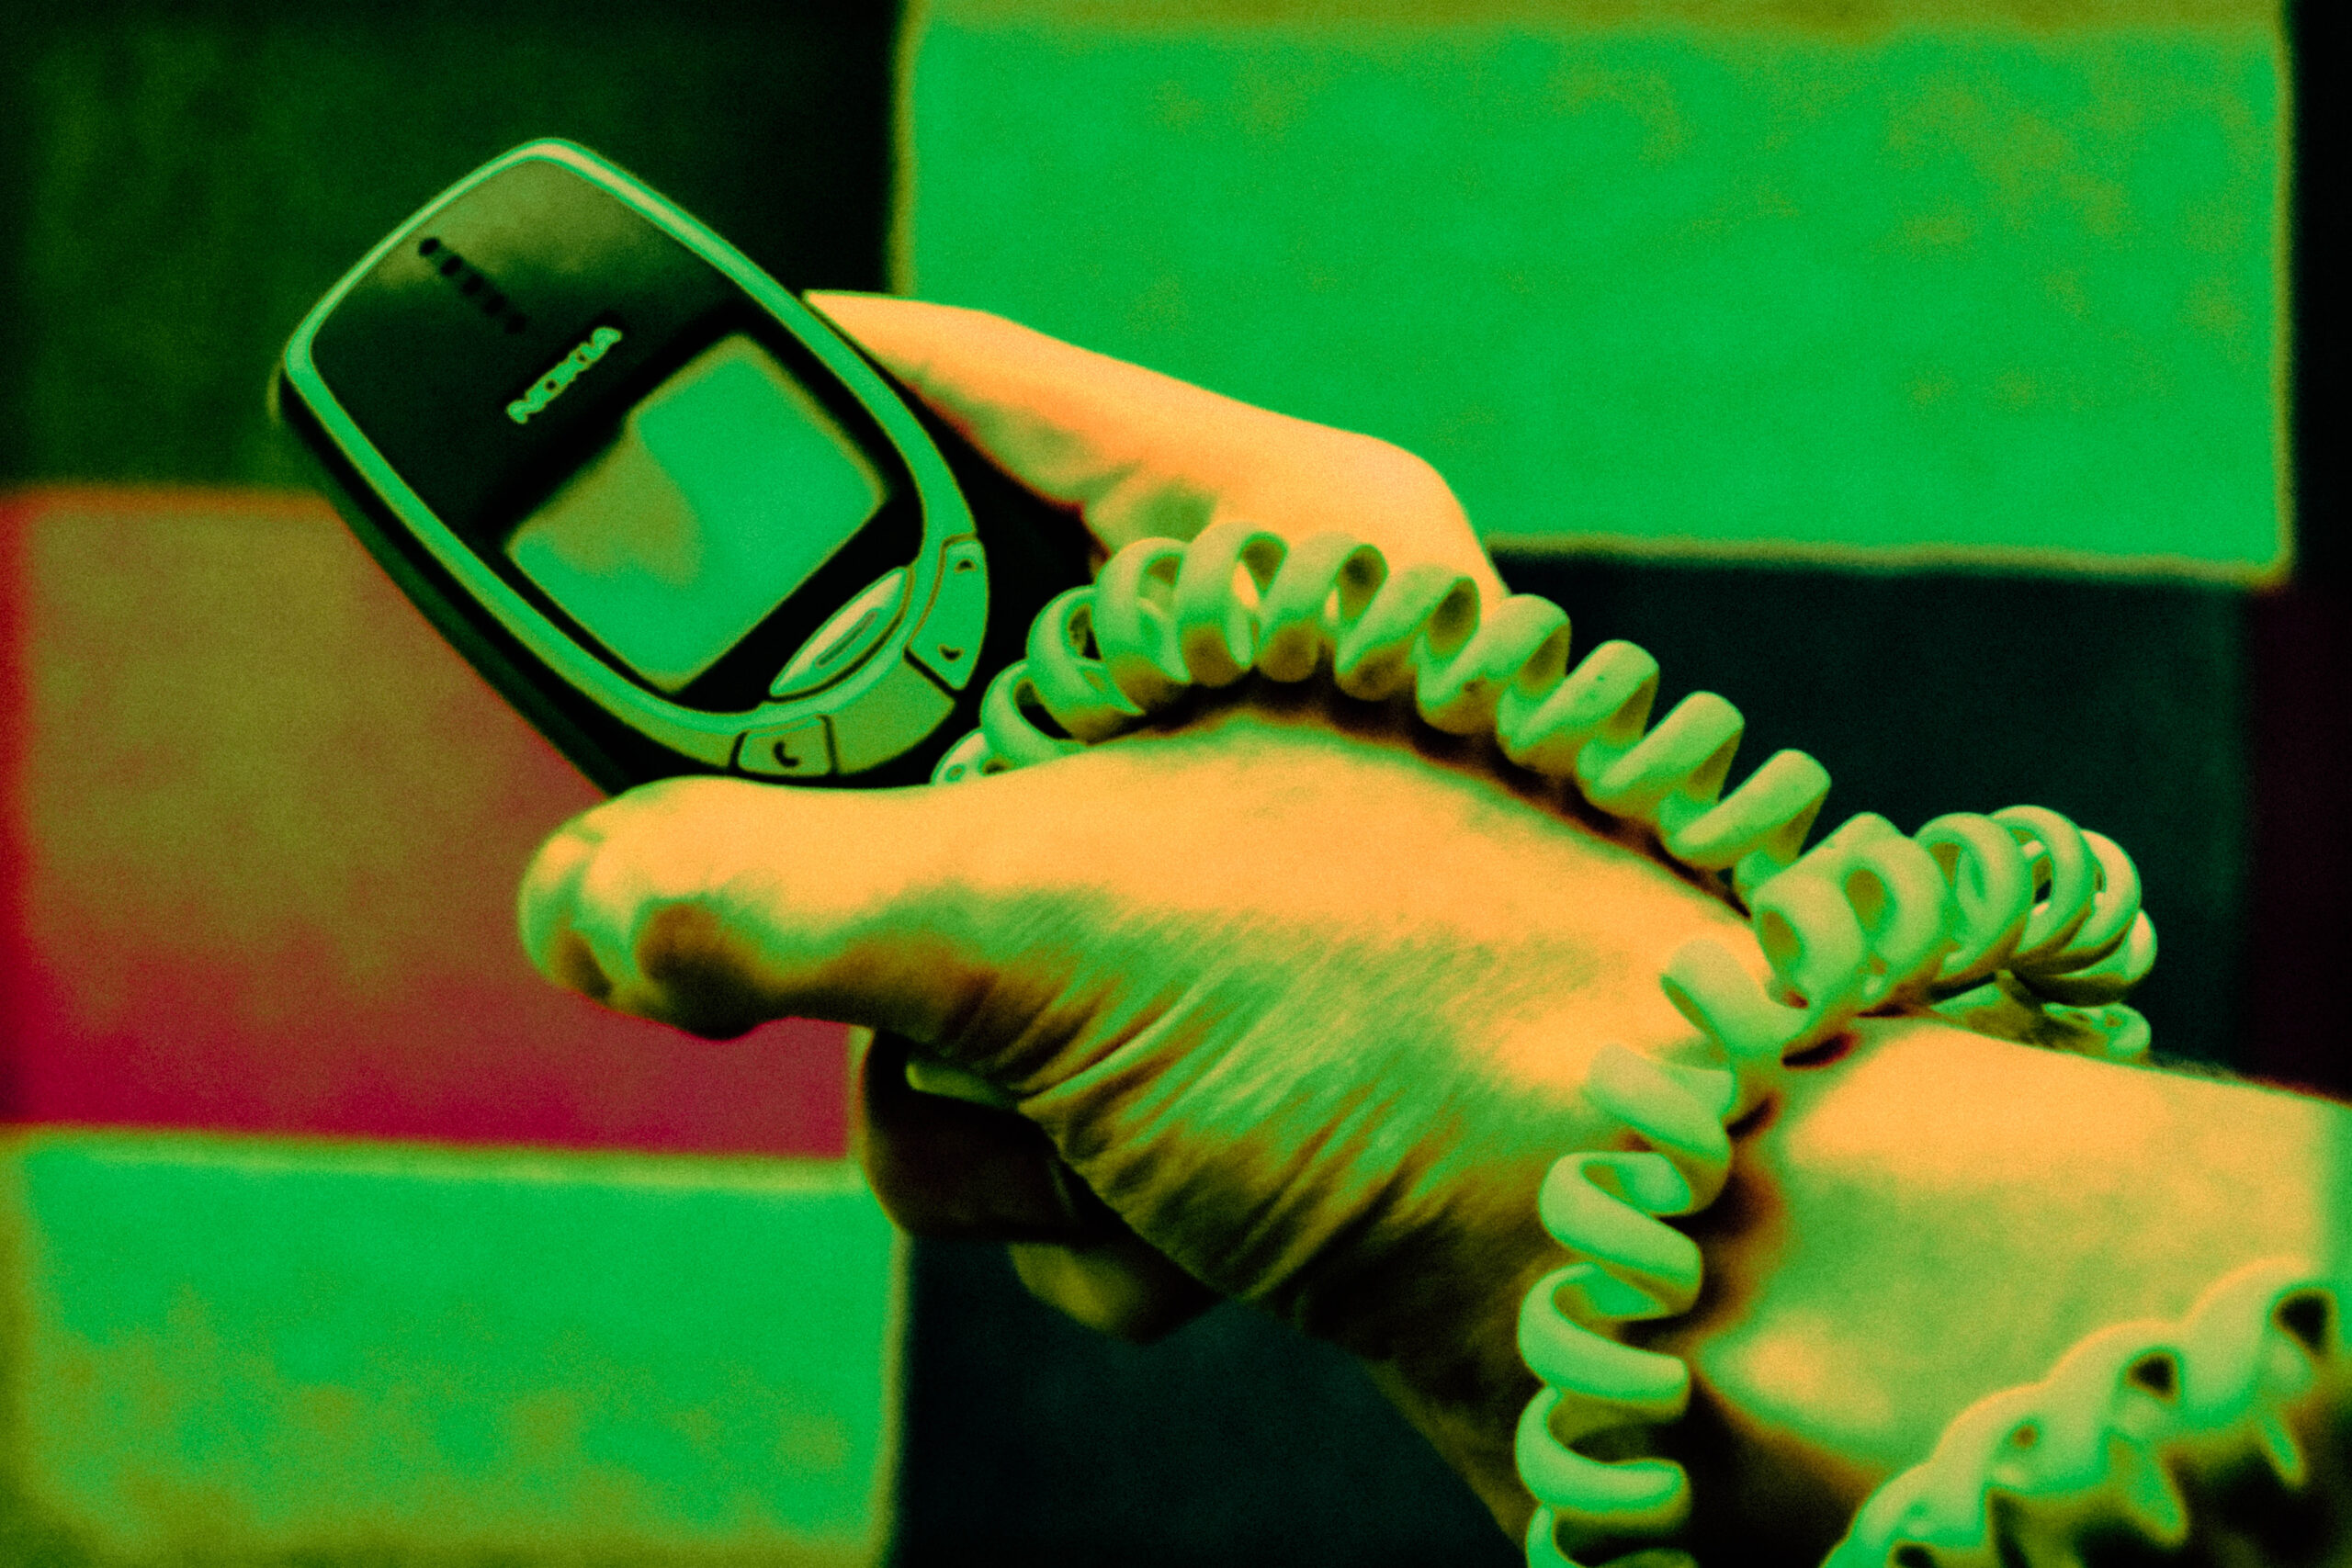 Hand holding a Nokia 3310 with a telephone cable wrapped around wrist